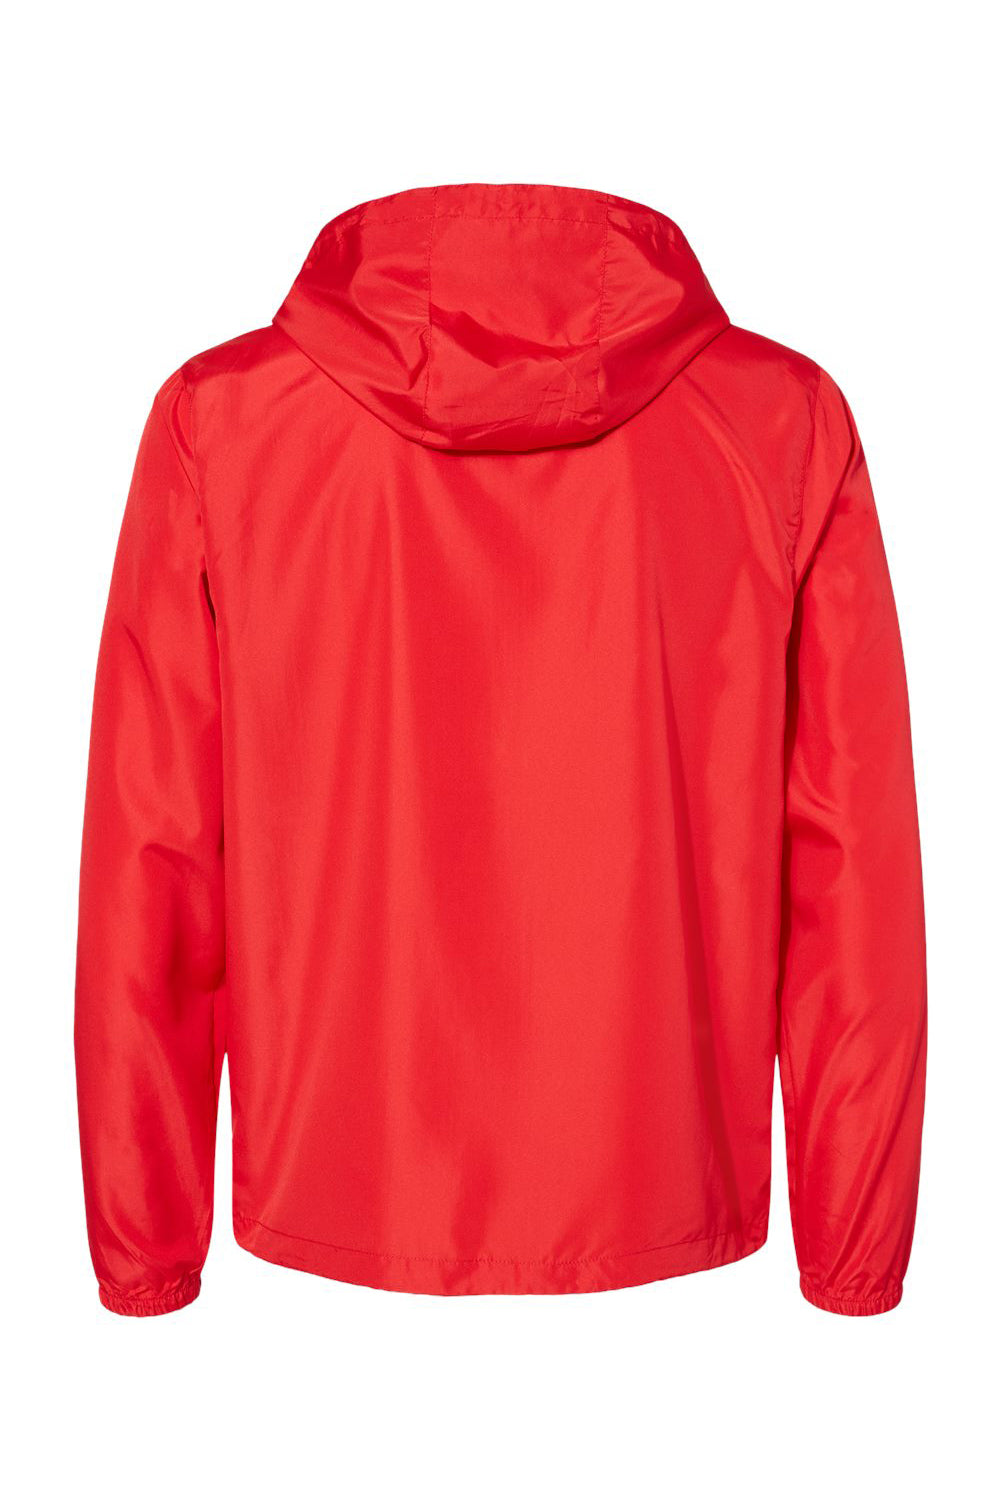 Independent Trading Co. EXP54LWZ Mens Full Zip Windbreaker Hooded Jacket Red Flat Back